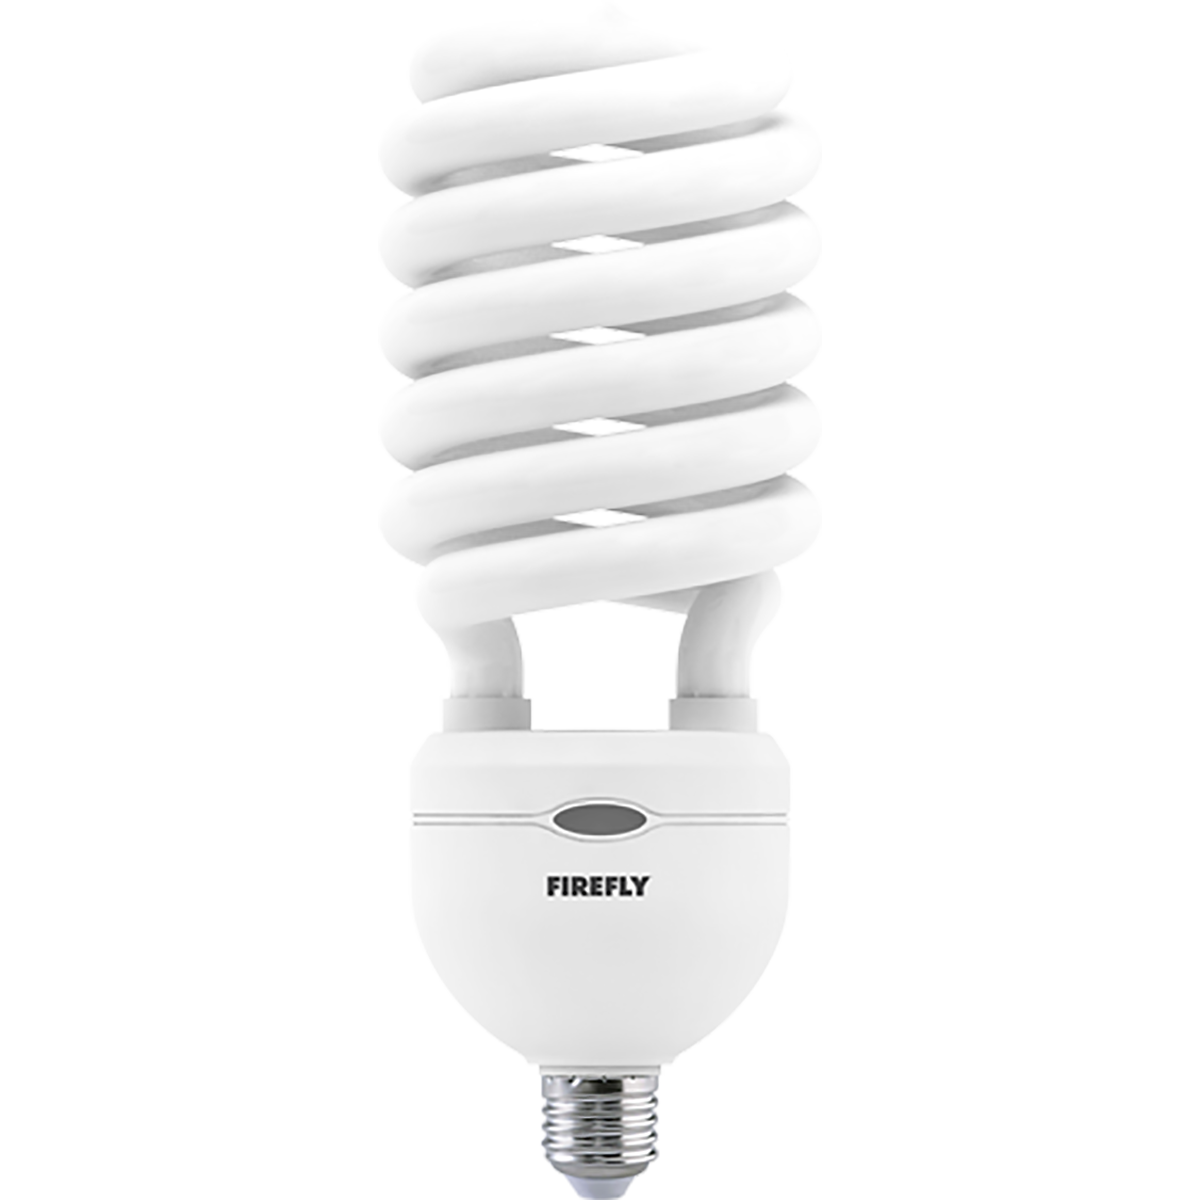 Firefly Compact Spiral Fluorescent Lamp 85W